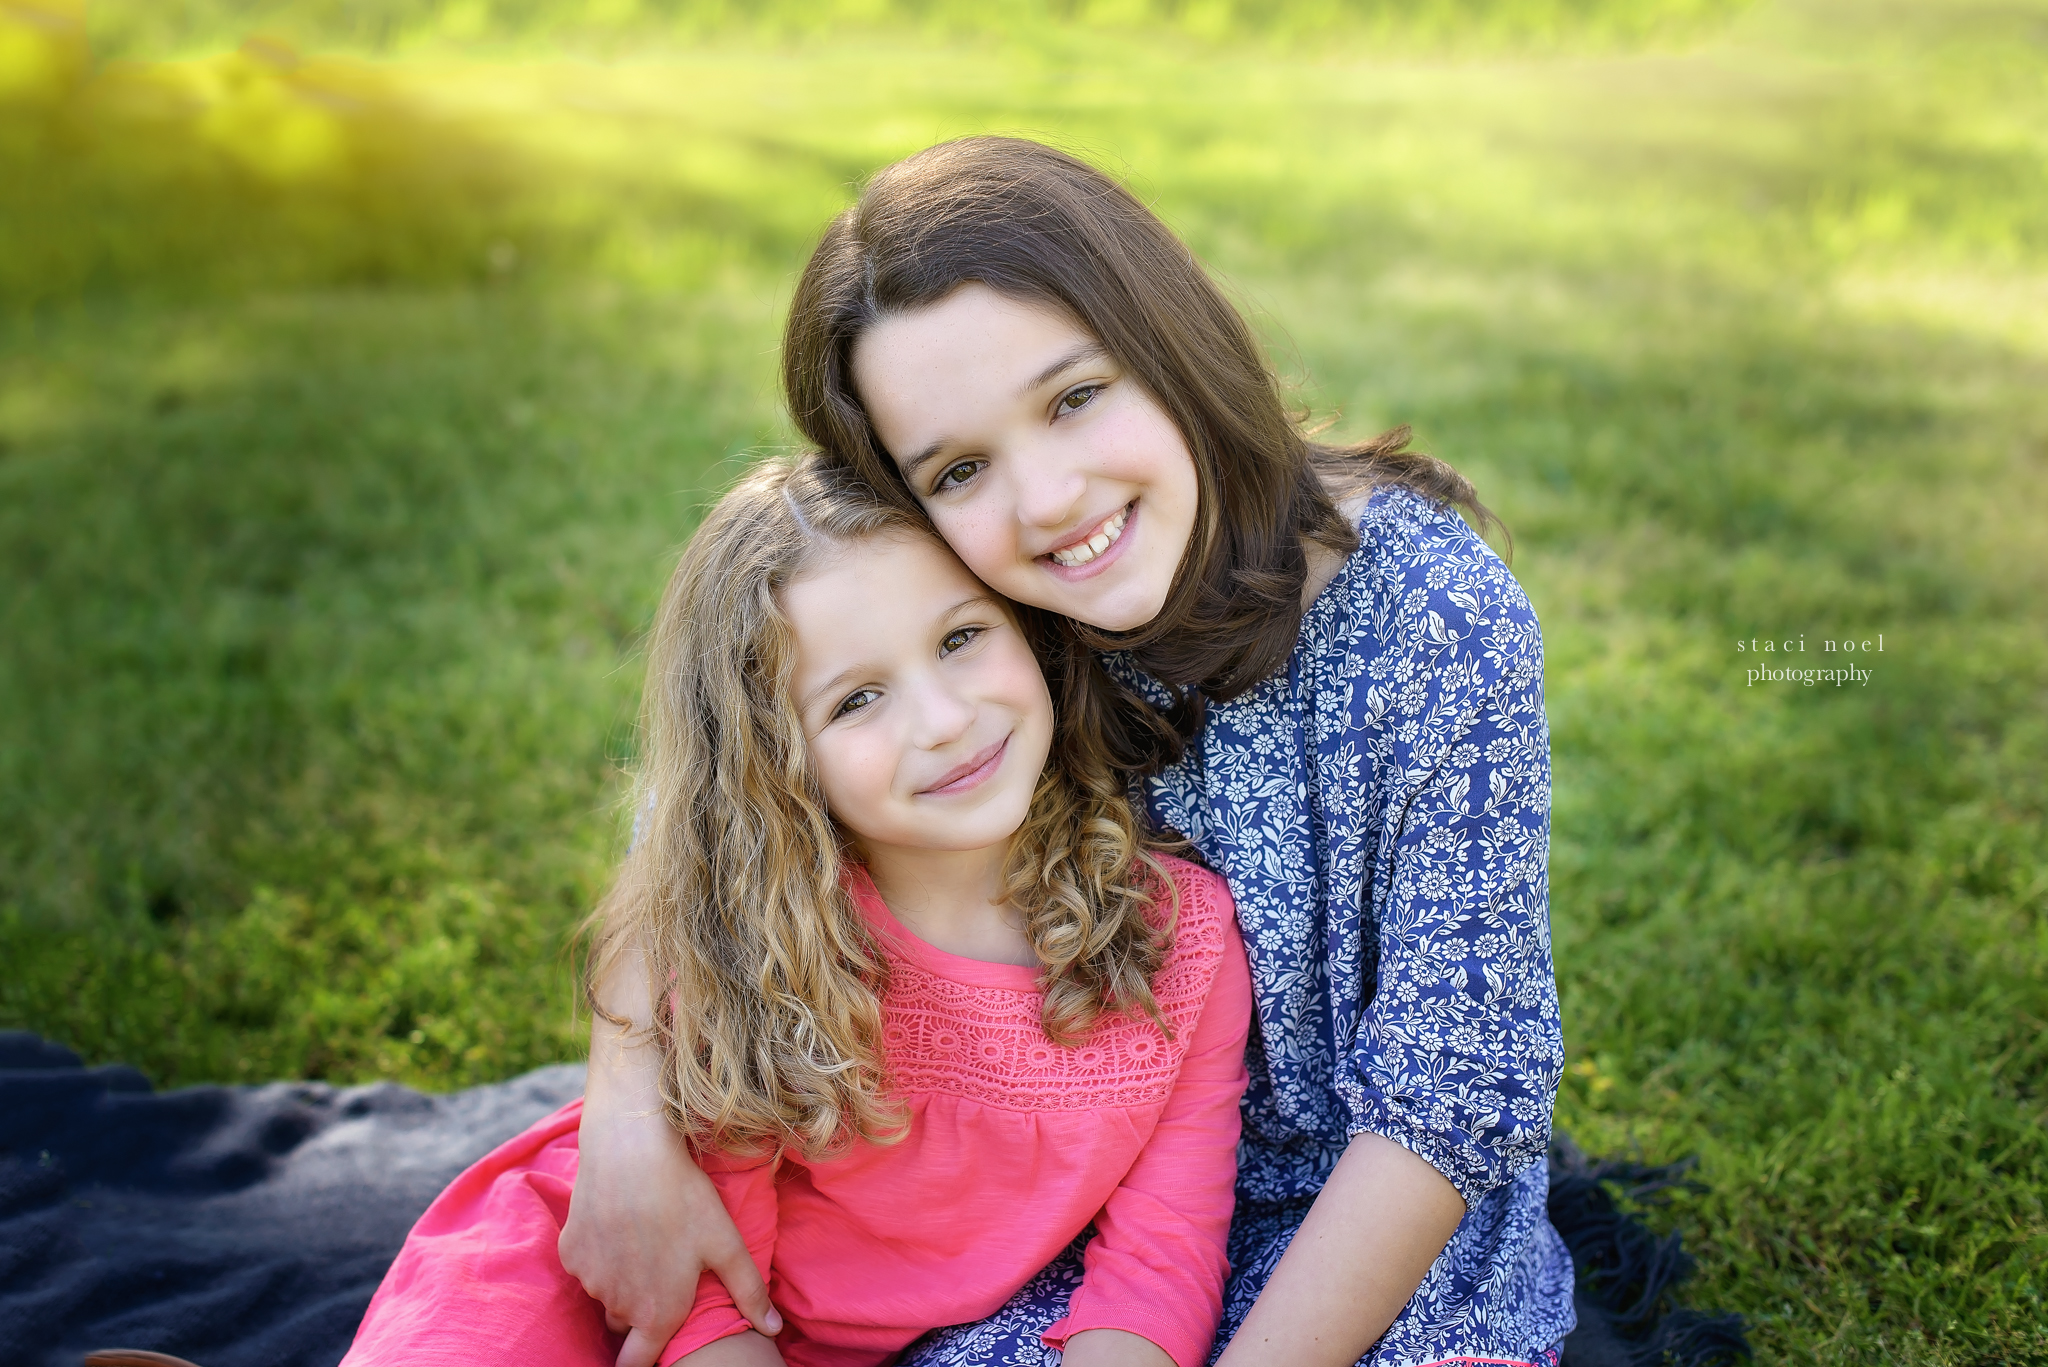  charlotte's best family photographer staci noel photographer captures family images of sisters 